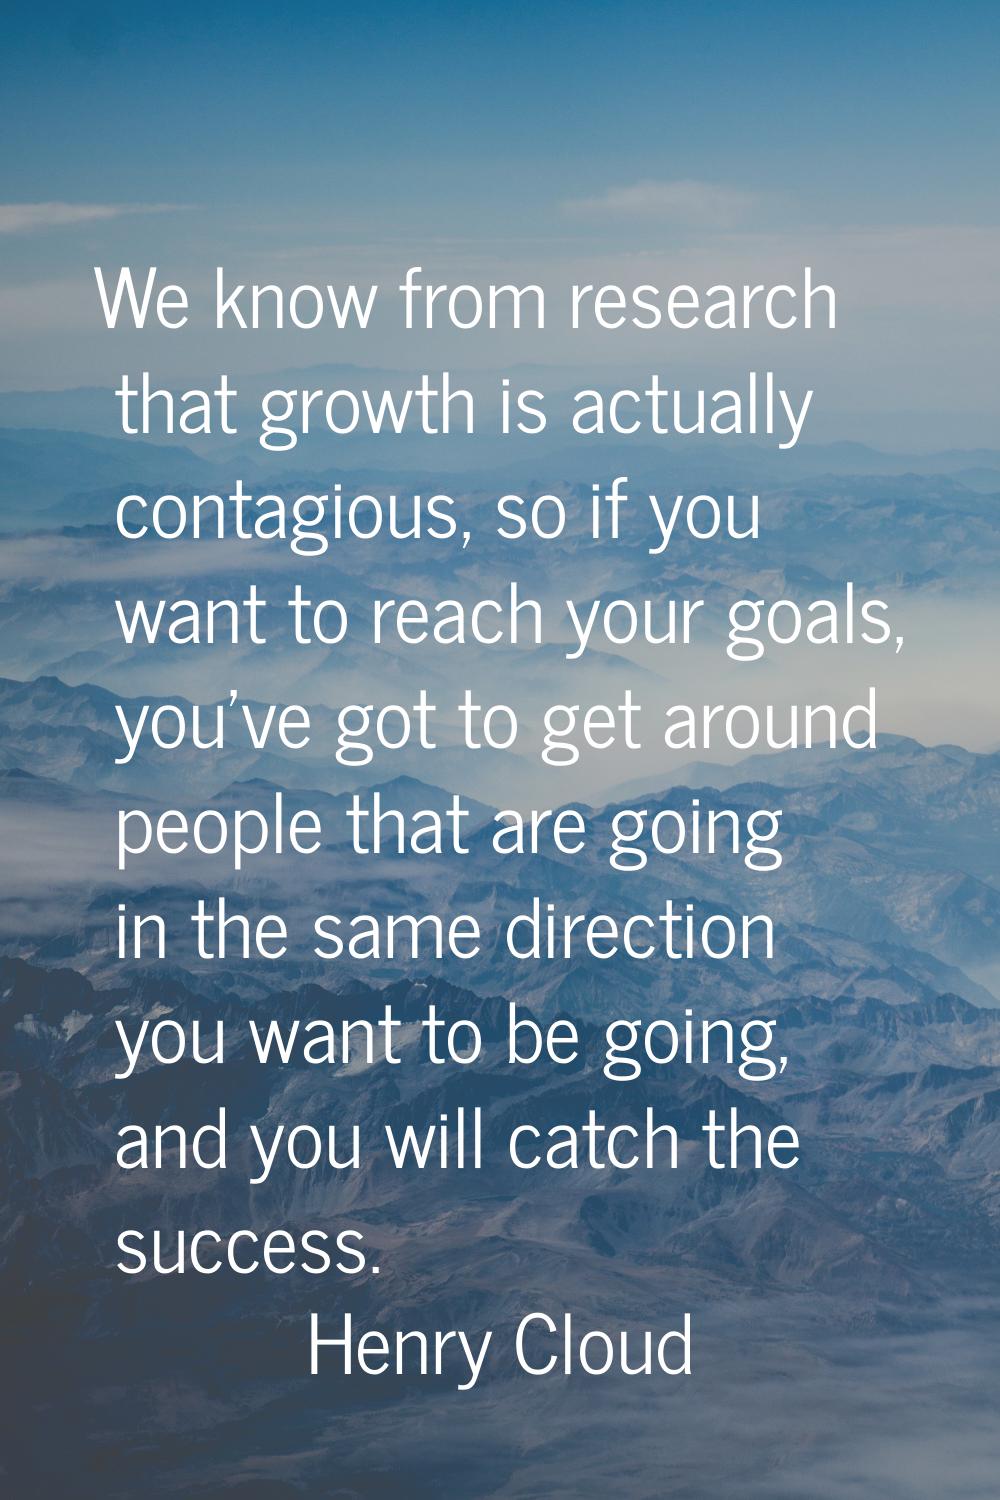 We know from research that growth is actually contagious, so if you want to reach your goals, you'v